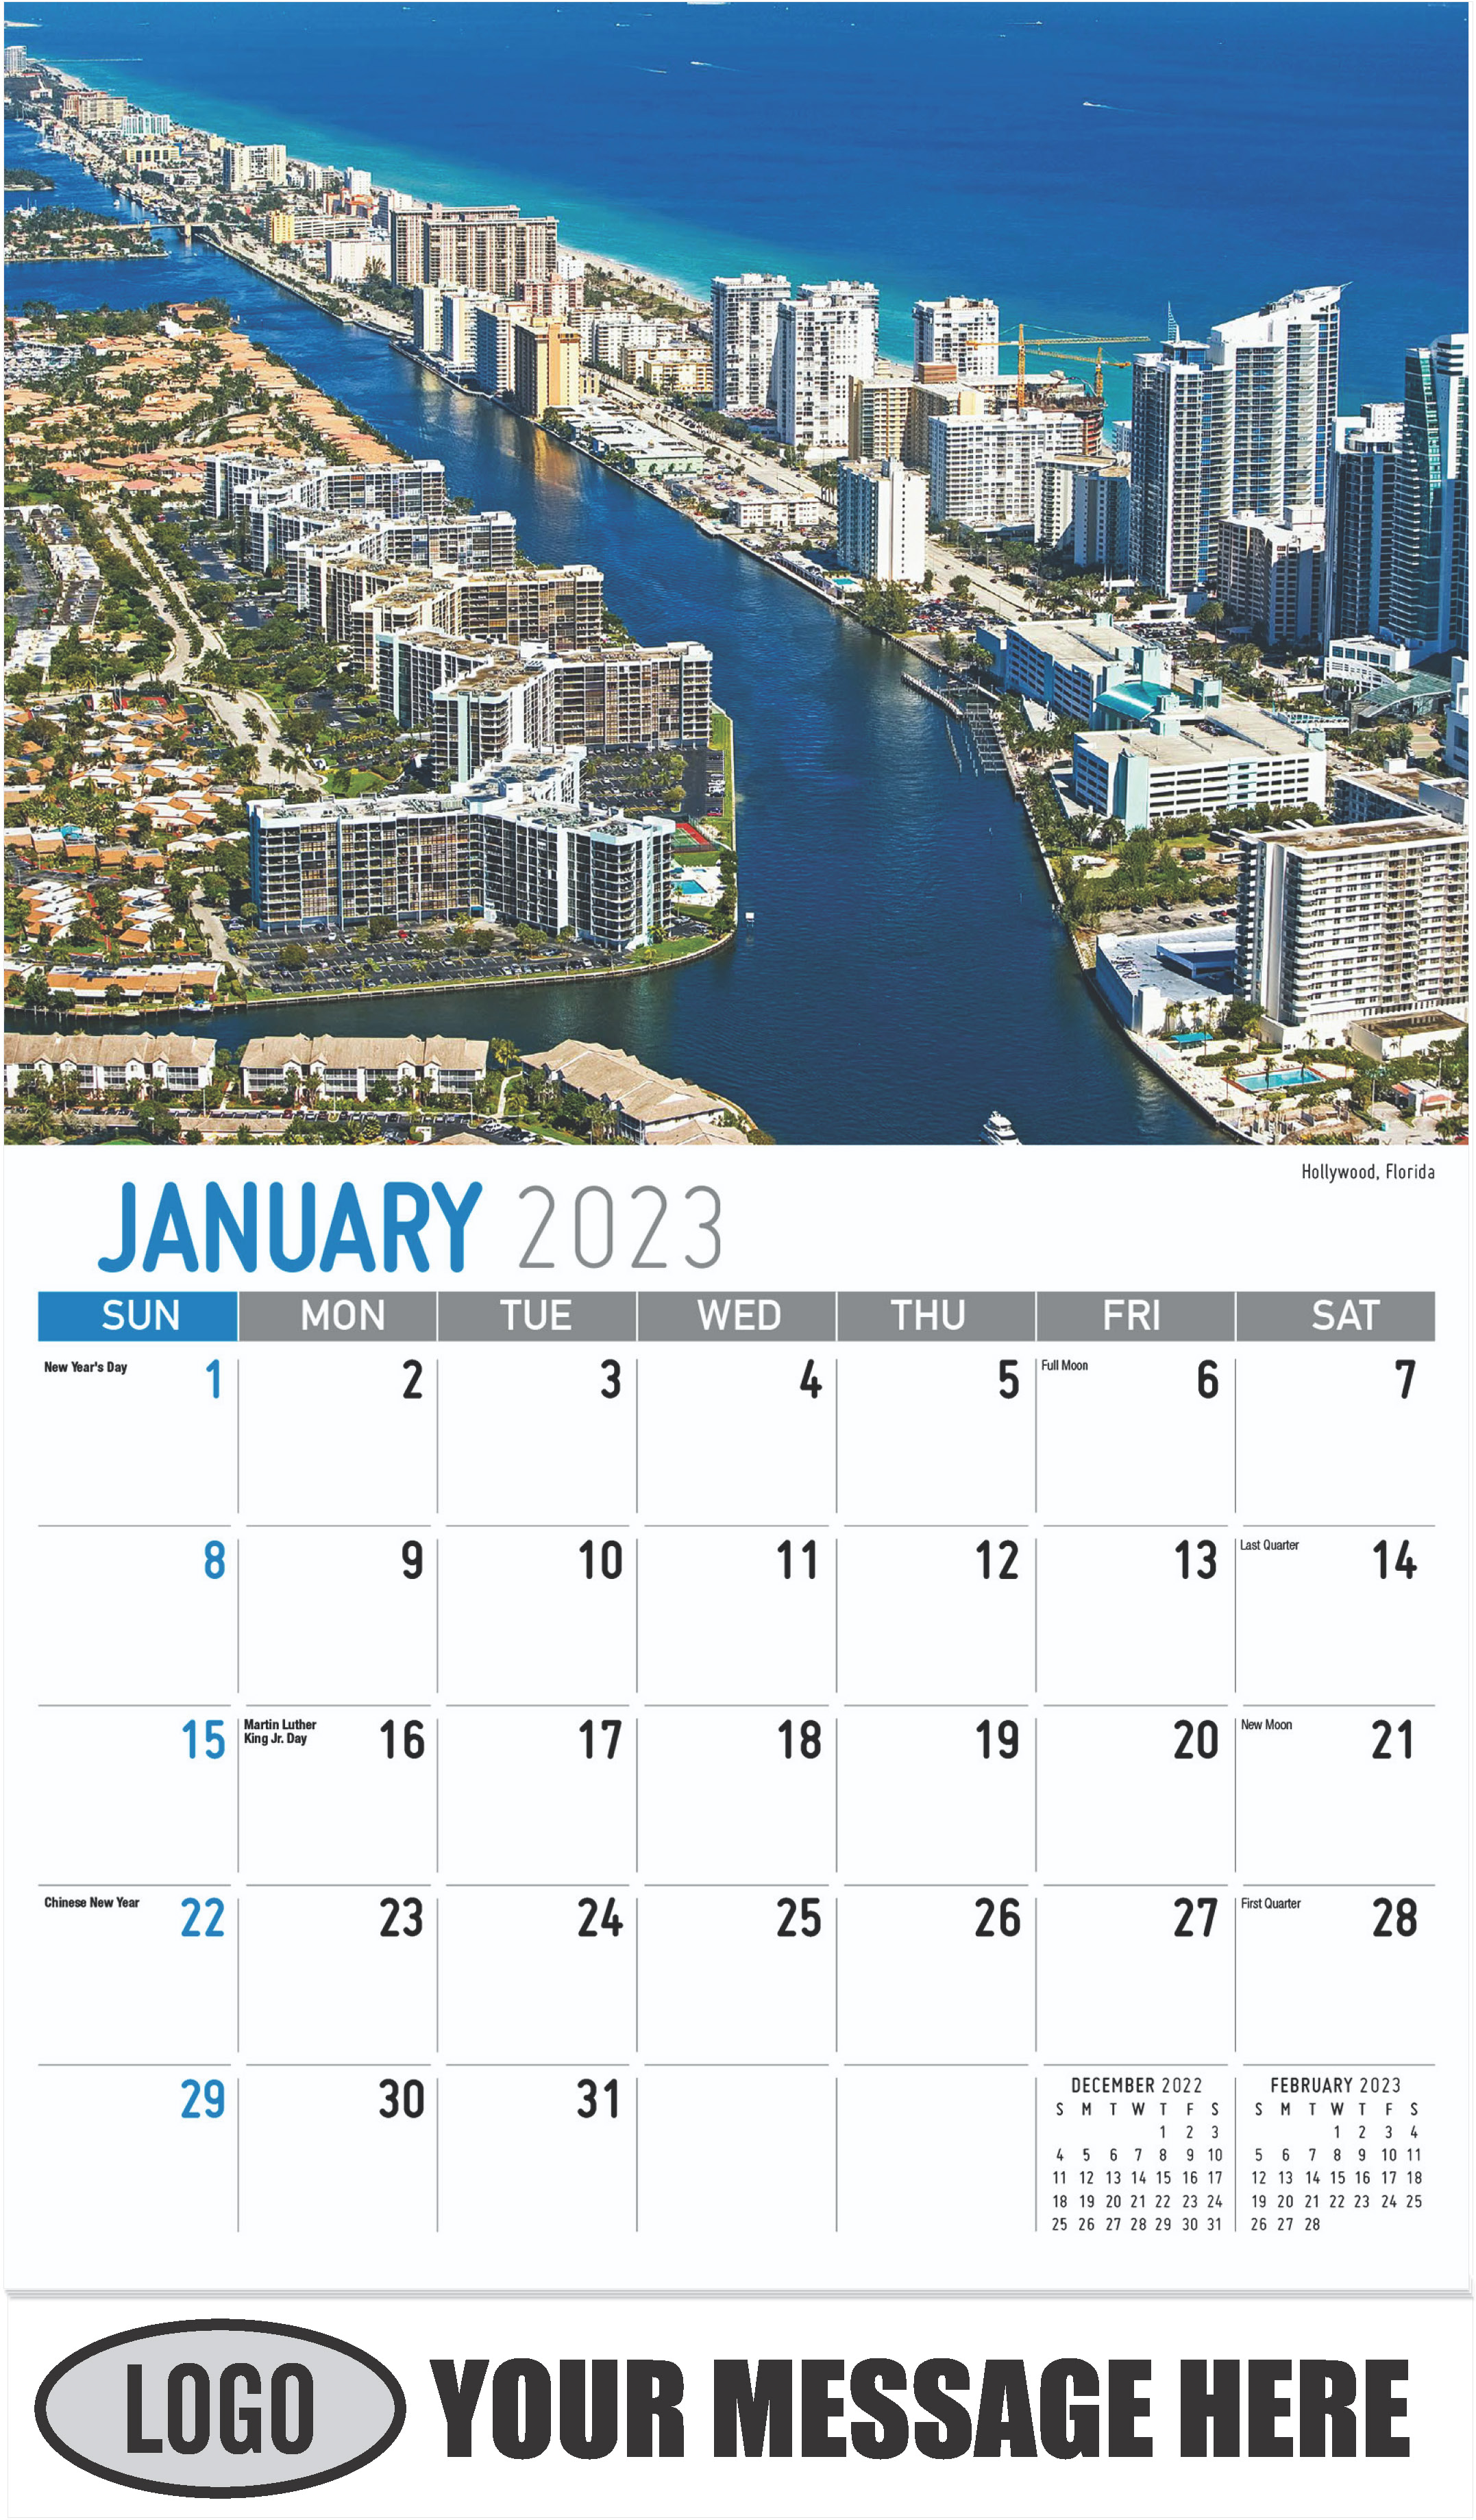 Fort Lauderdale, Florida
(up for debate) - January - Scenes of Southeast USA 2023 Promotional Calendar